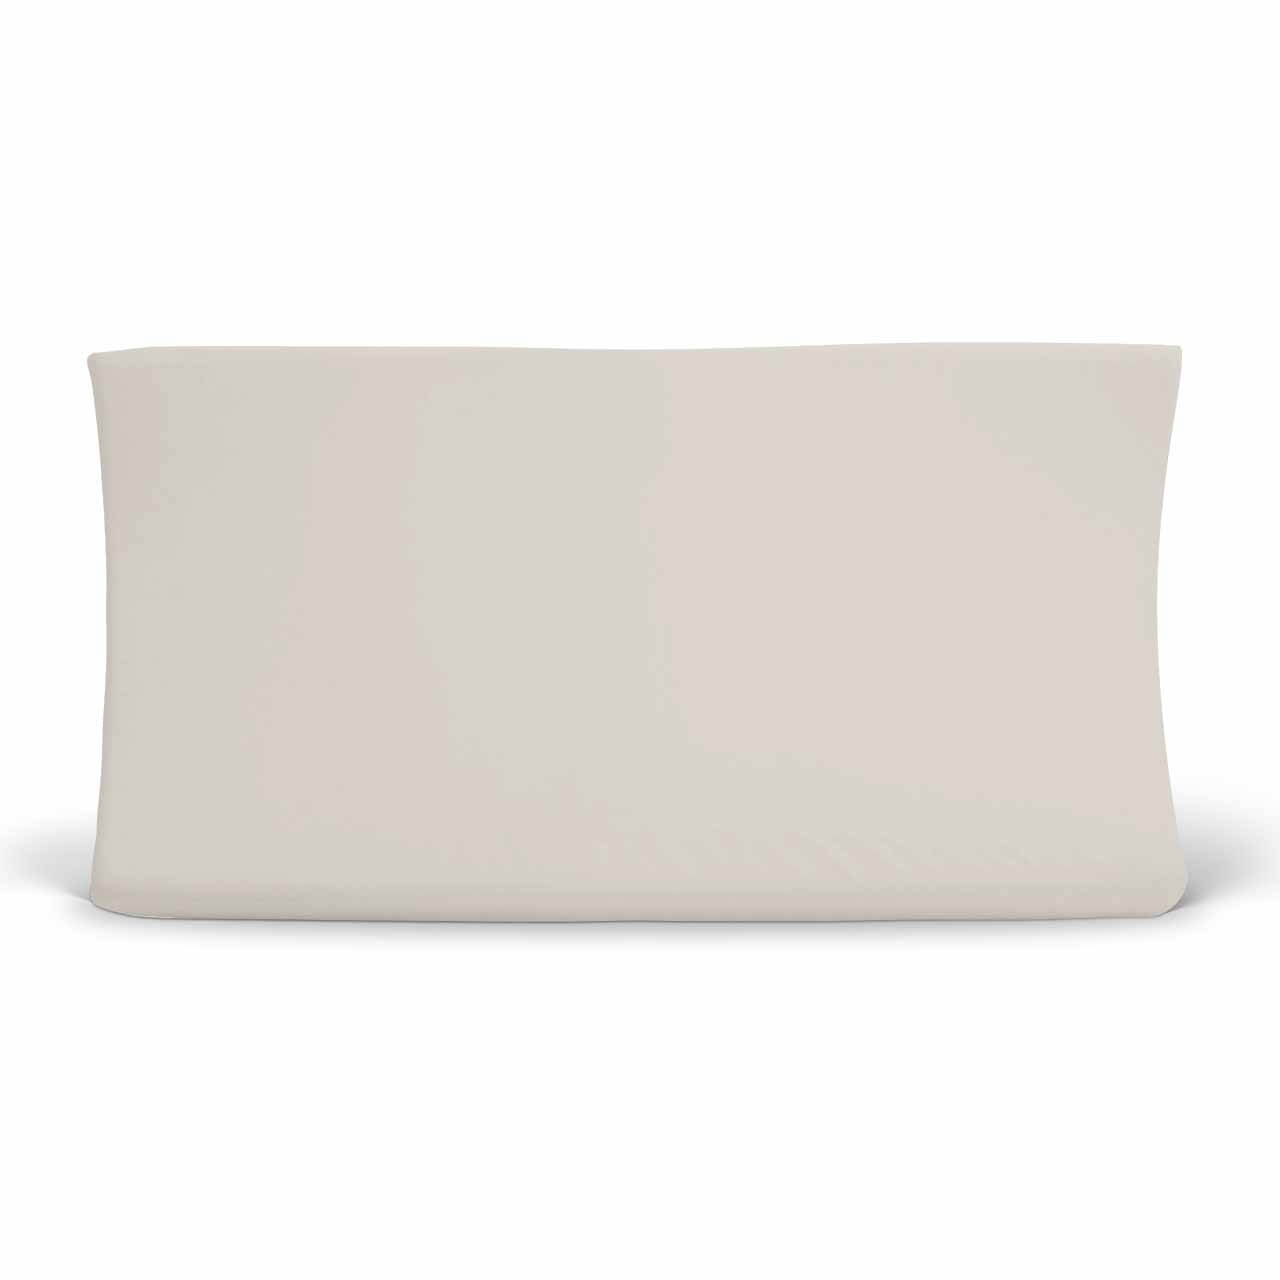 Solid Soft Taupe Sand Changing Table Pad Cover in Soft Jersey Knit